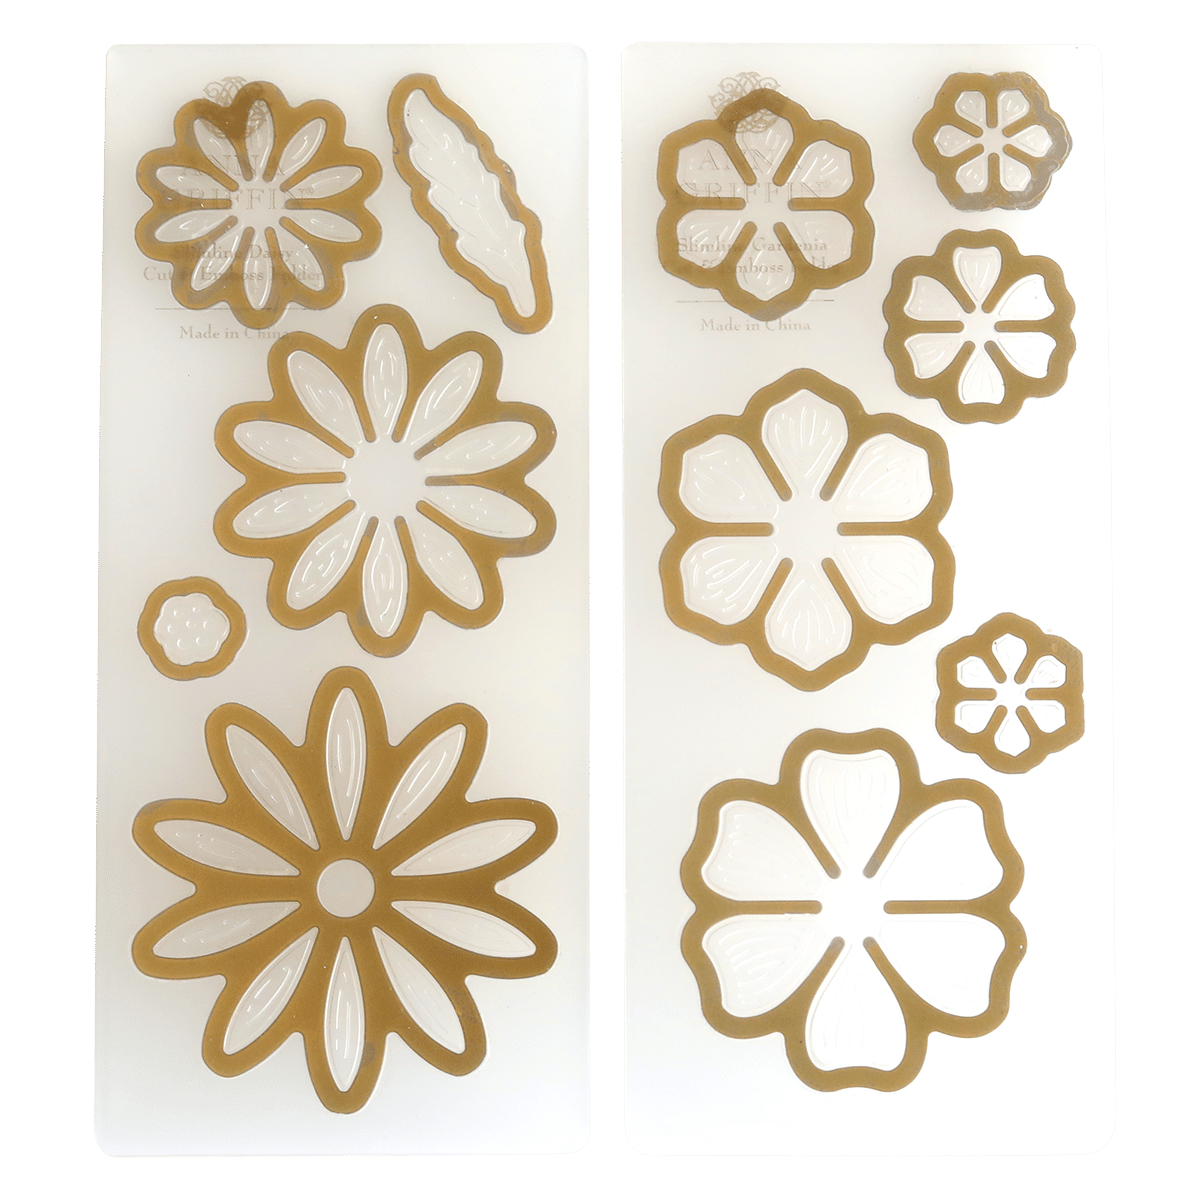 A set of Slimline Flower Cut and Emboss Folders in gold and white.